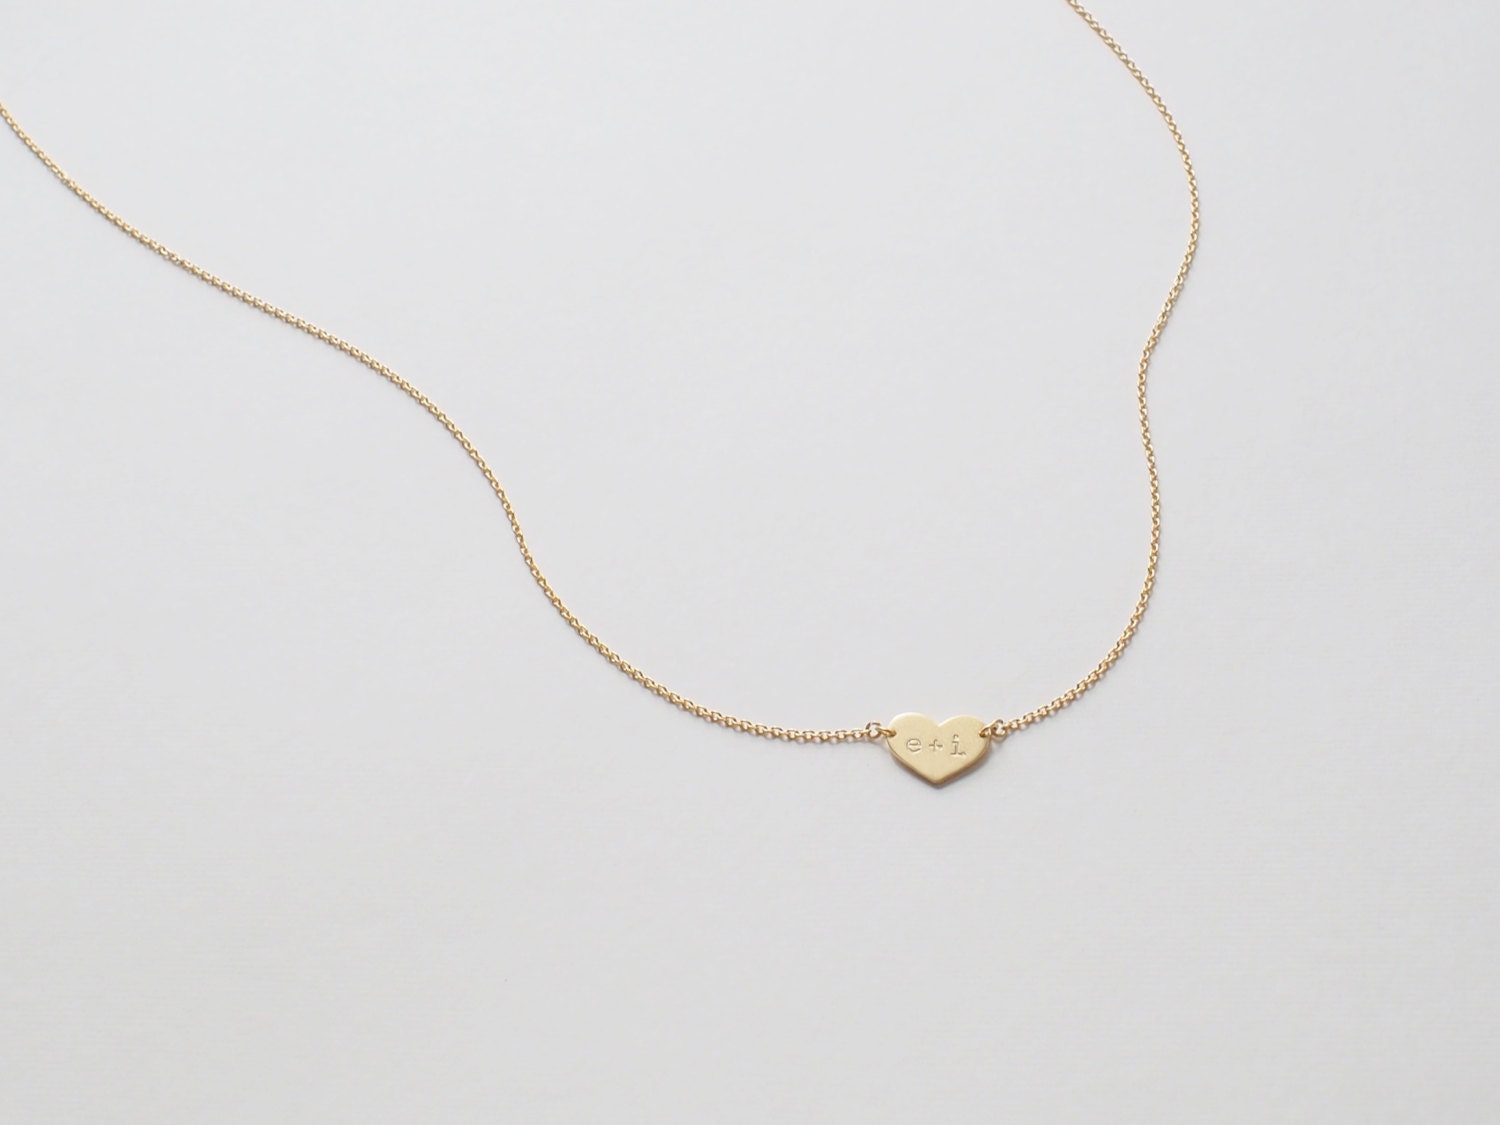 Dainty Heart Necklace Personalized Engraved Initials Heart - Etsy